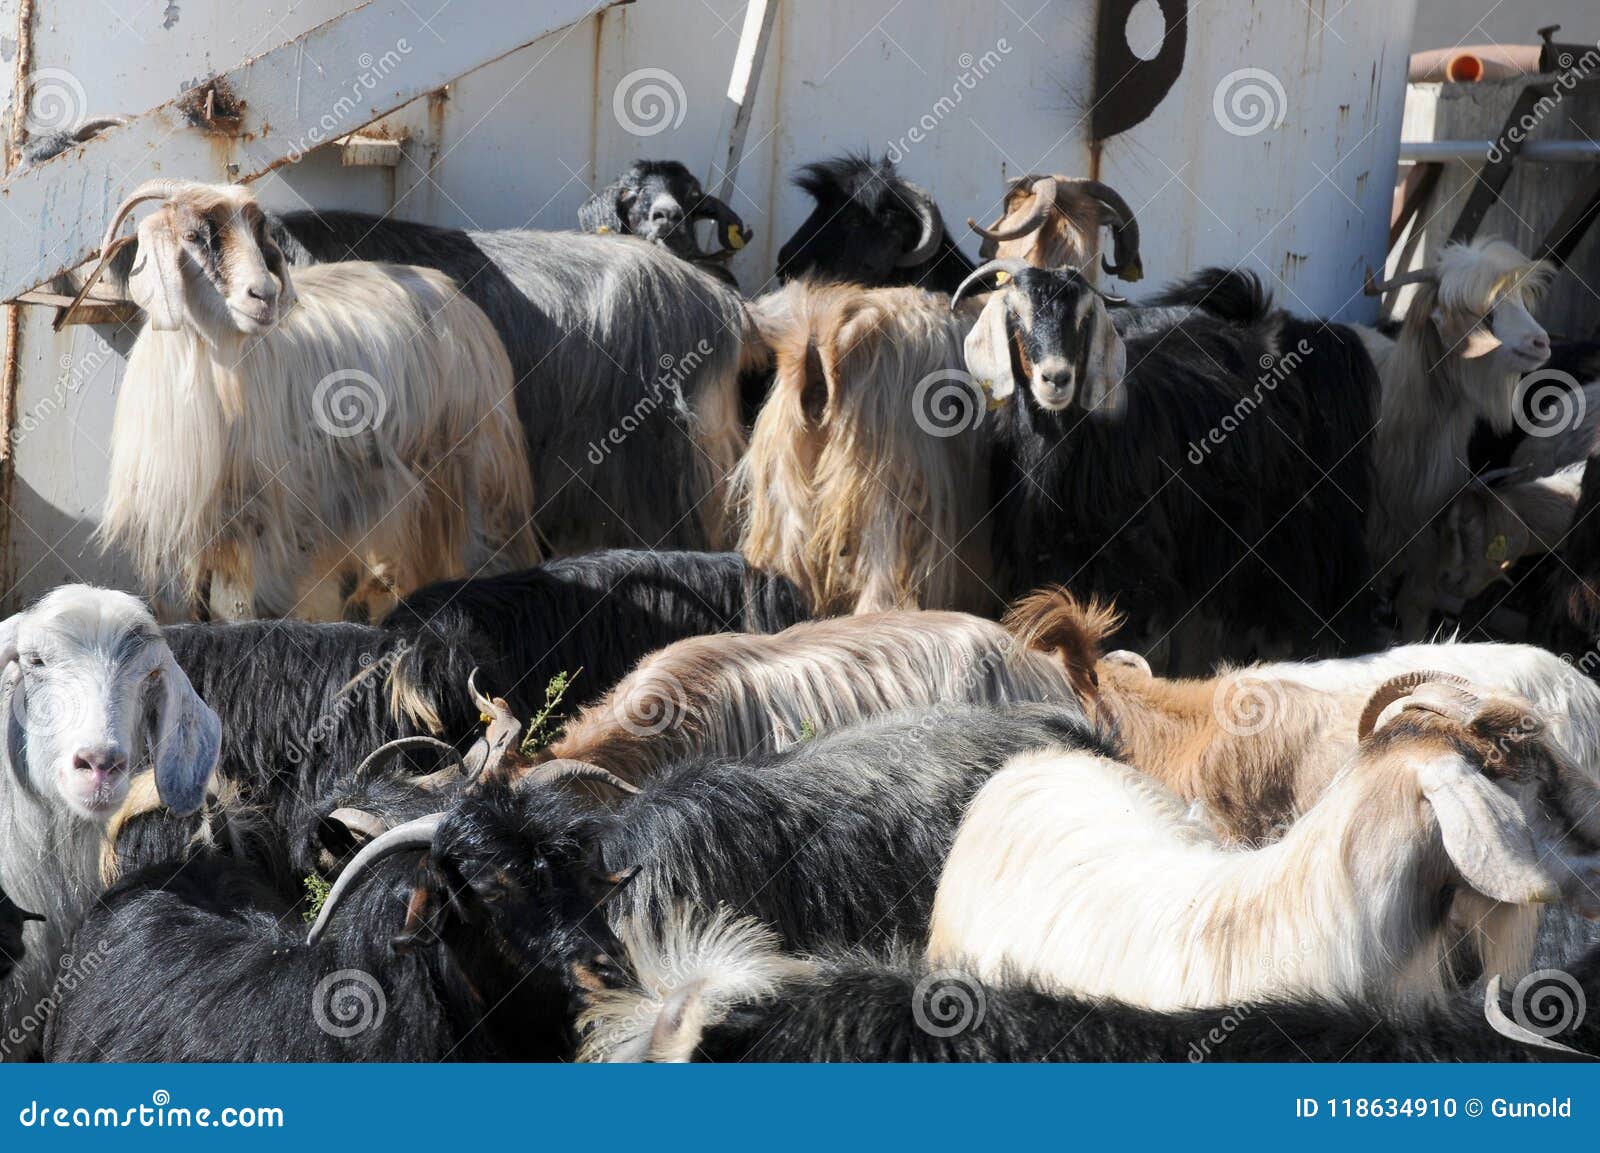 a herd of goats on a farm in east anatolia, turkey